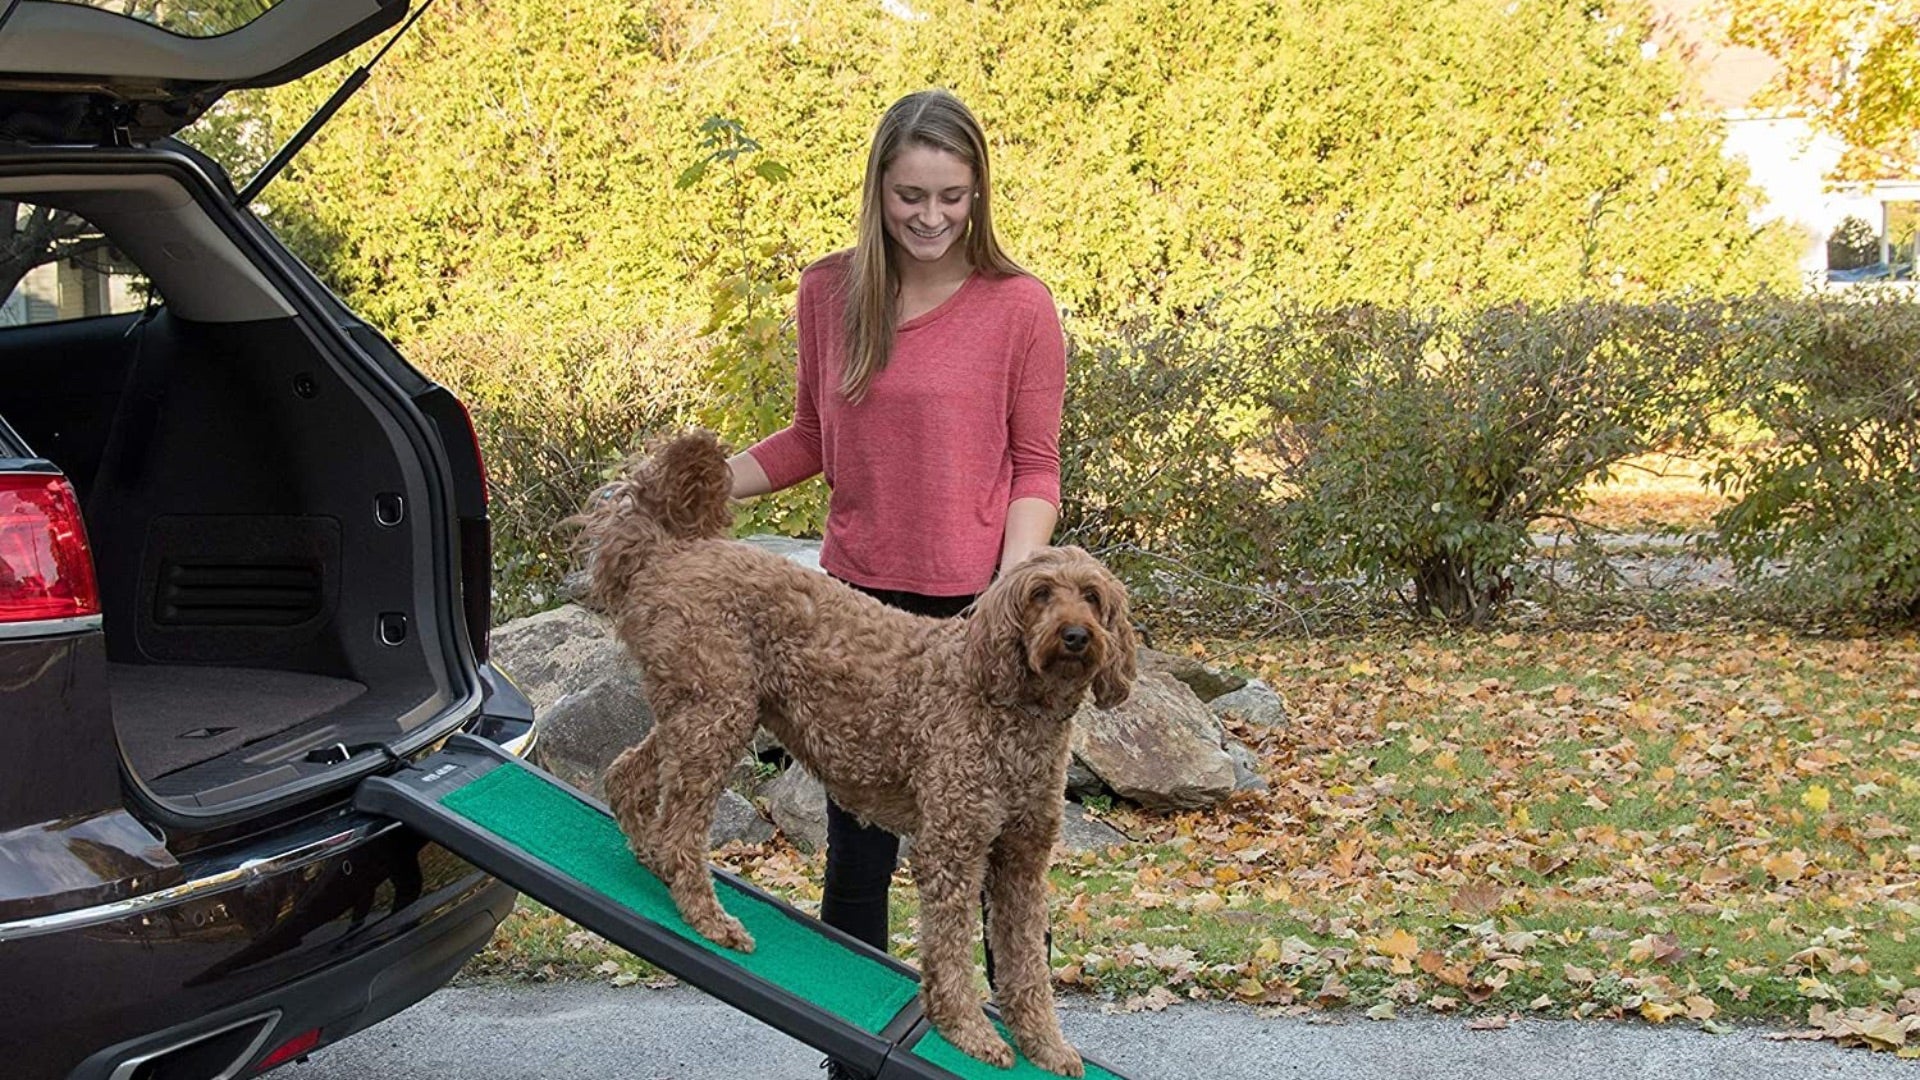 for Trucks 3-layer Foldable Dogs Stairs Pet Ladder Cars E/T Folding Dog Car Ramps Increased Nonslip Surface SUV and High Beds|for Small Medium Large Dog 